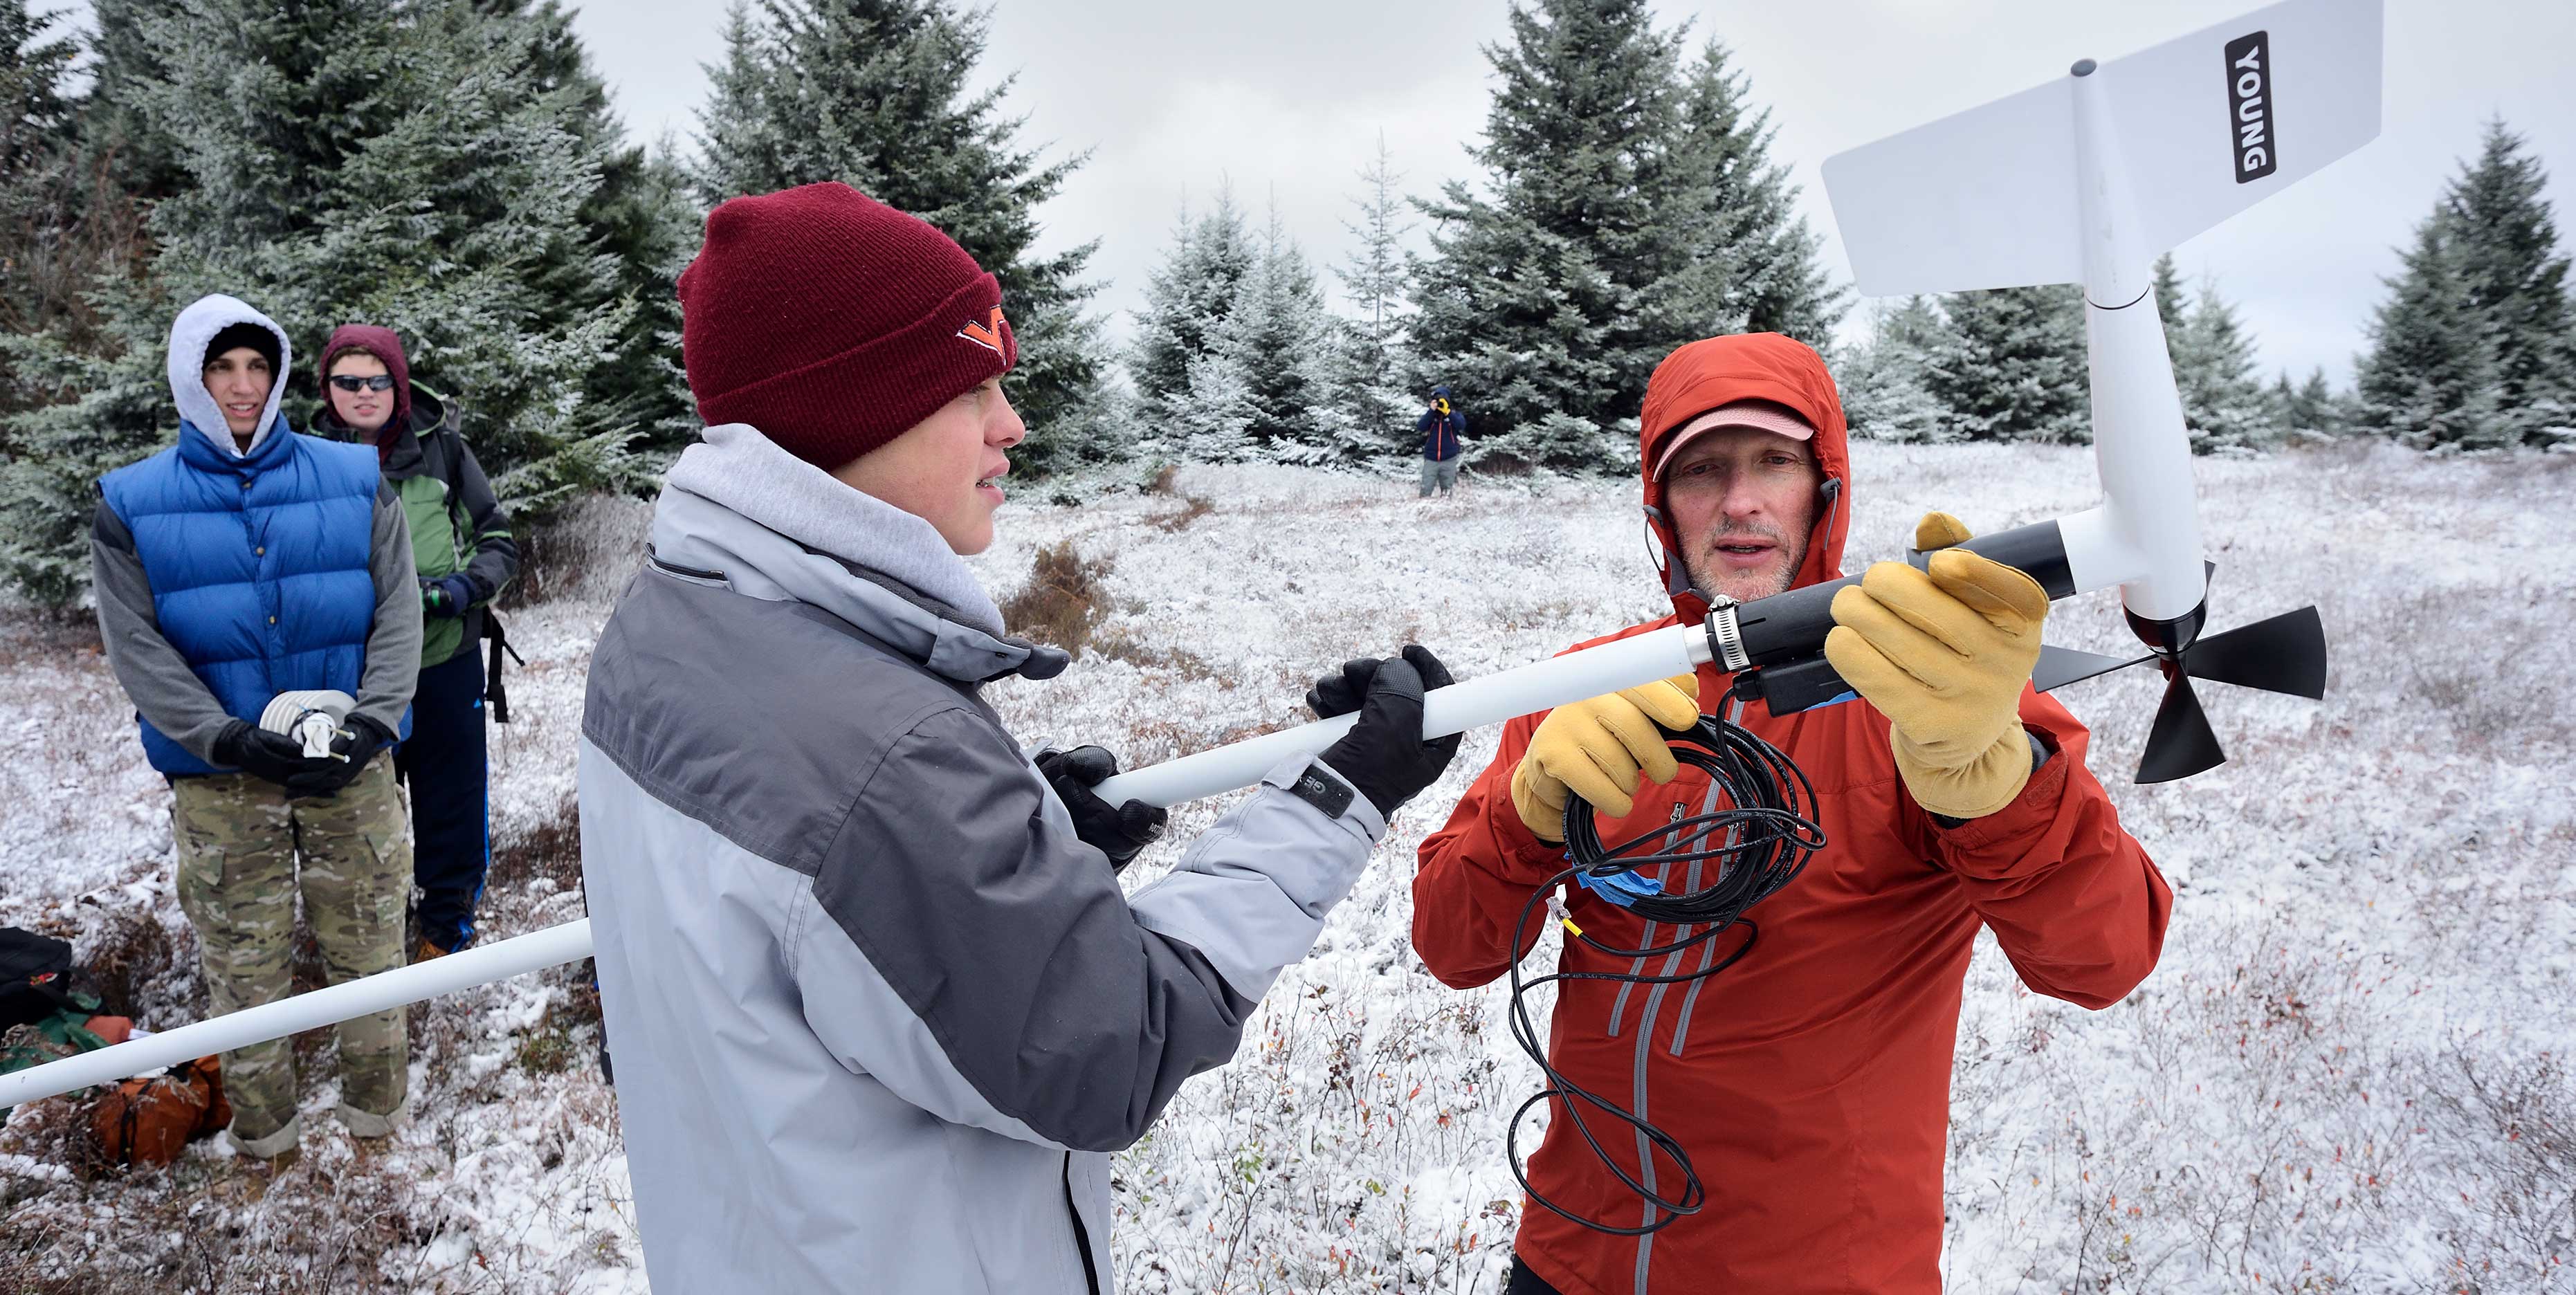 Two people in winter clothing hold a long piece of equipment. Two other people stand in the background watching them.